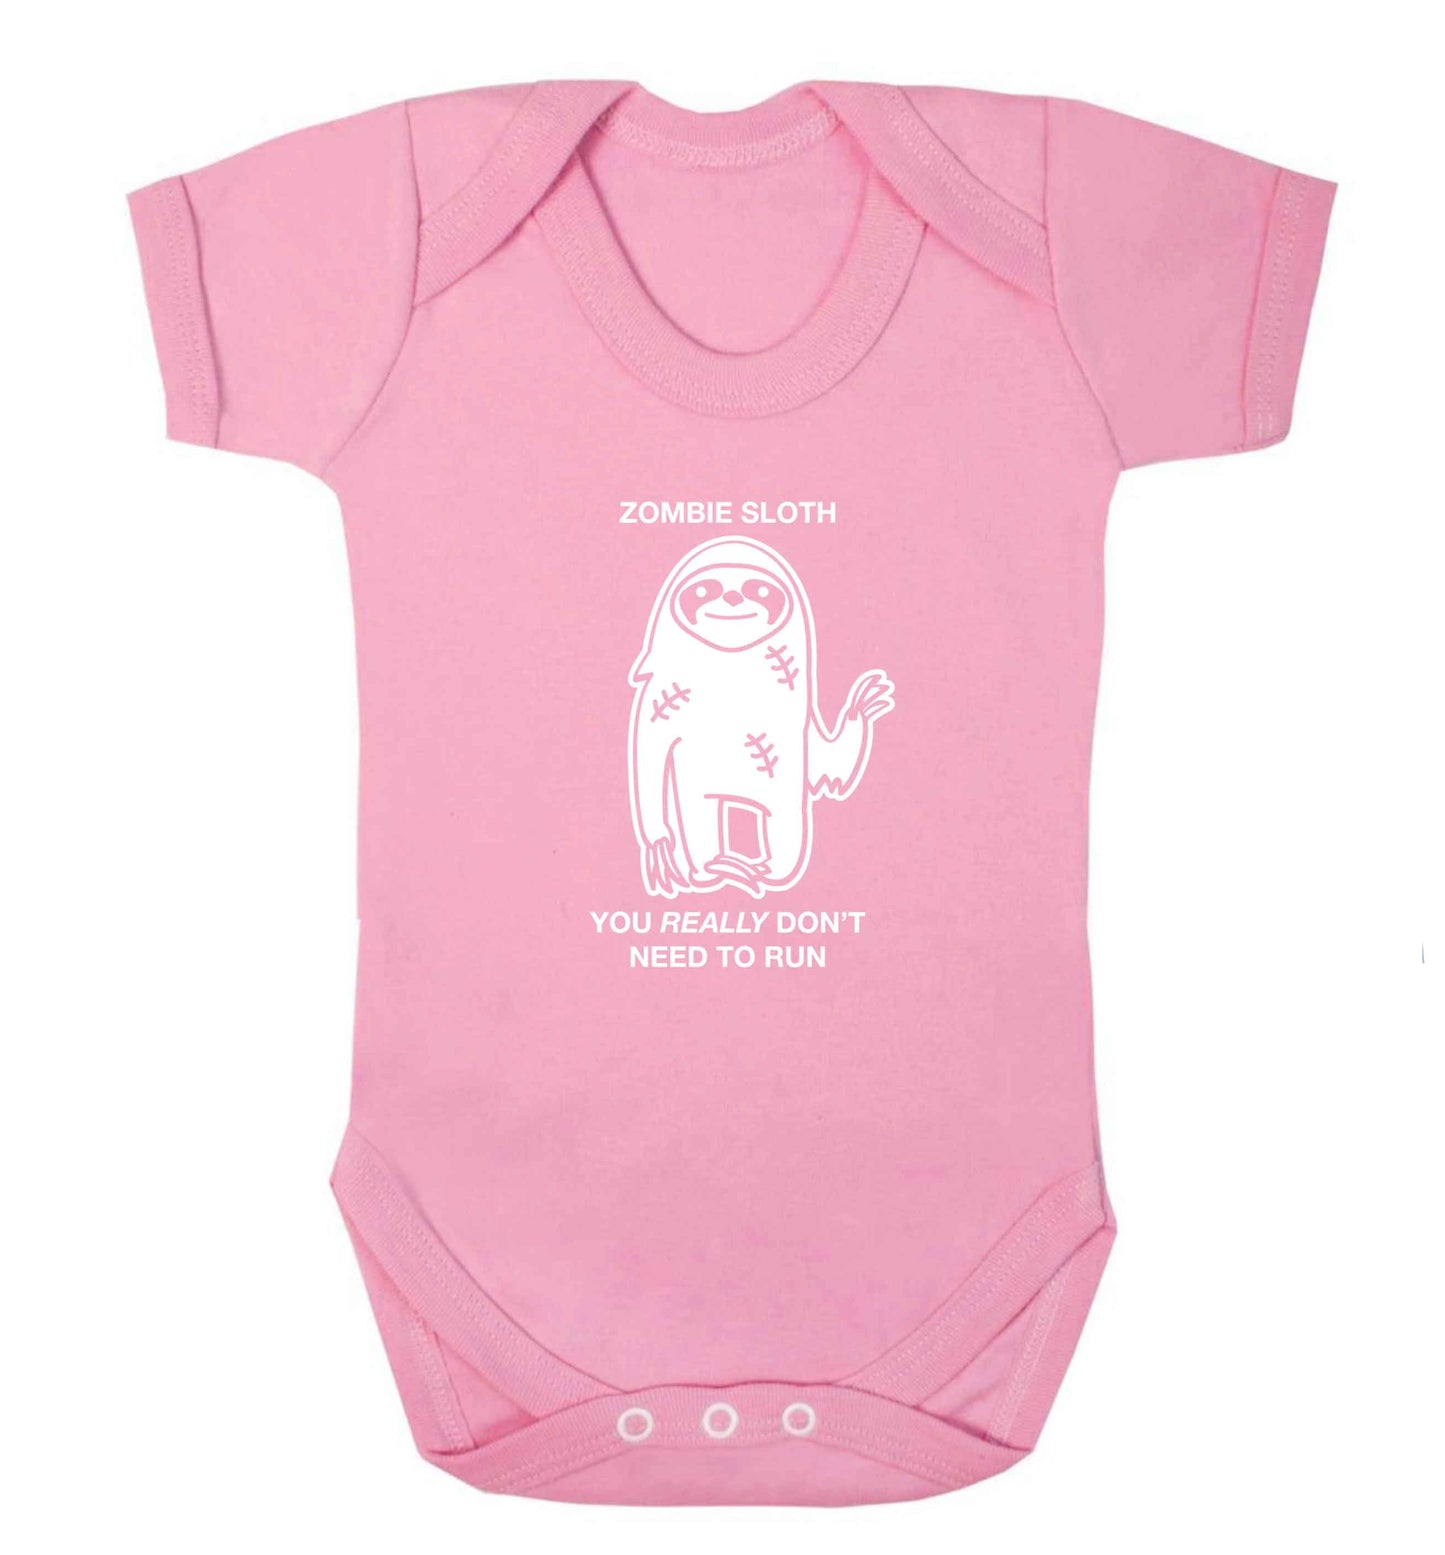 Zombie sloth you really don't need to run baby vest pale pink 18-24 months